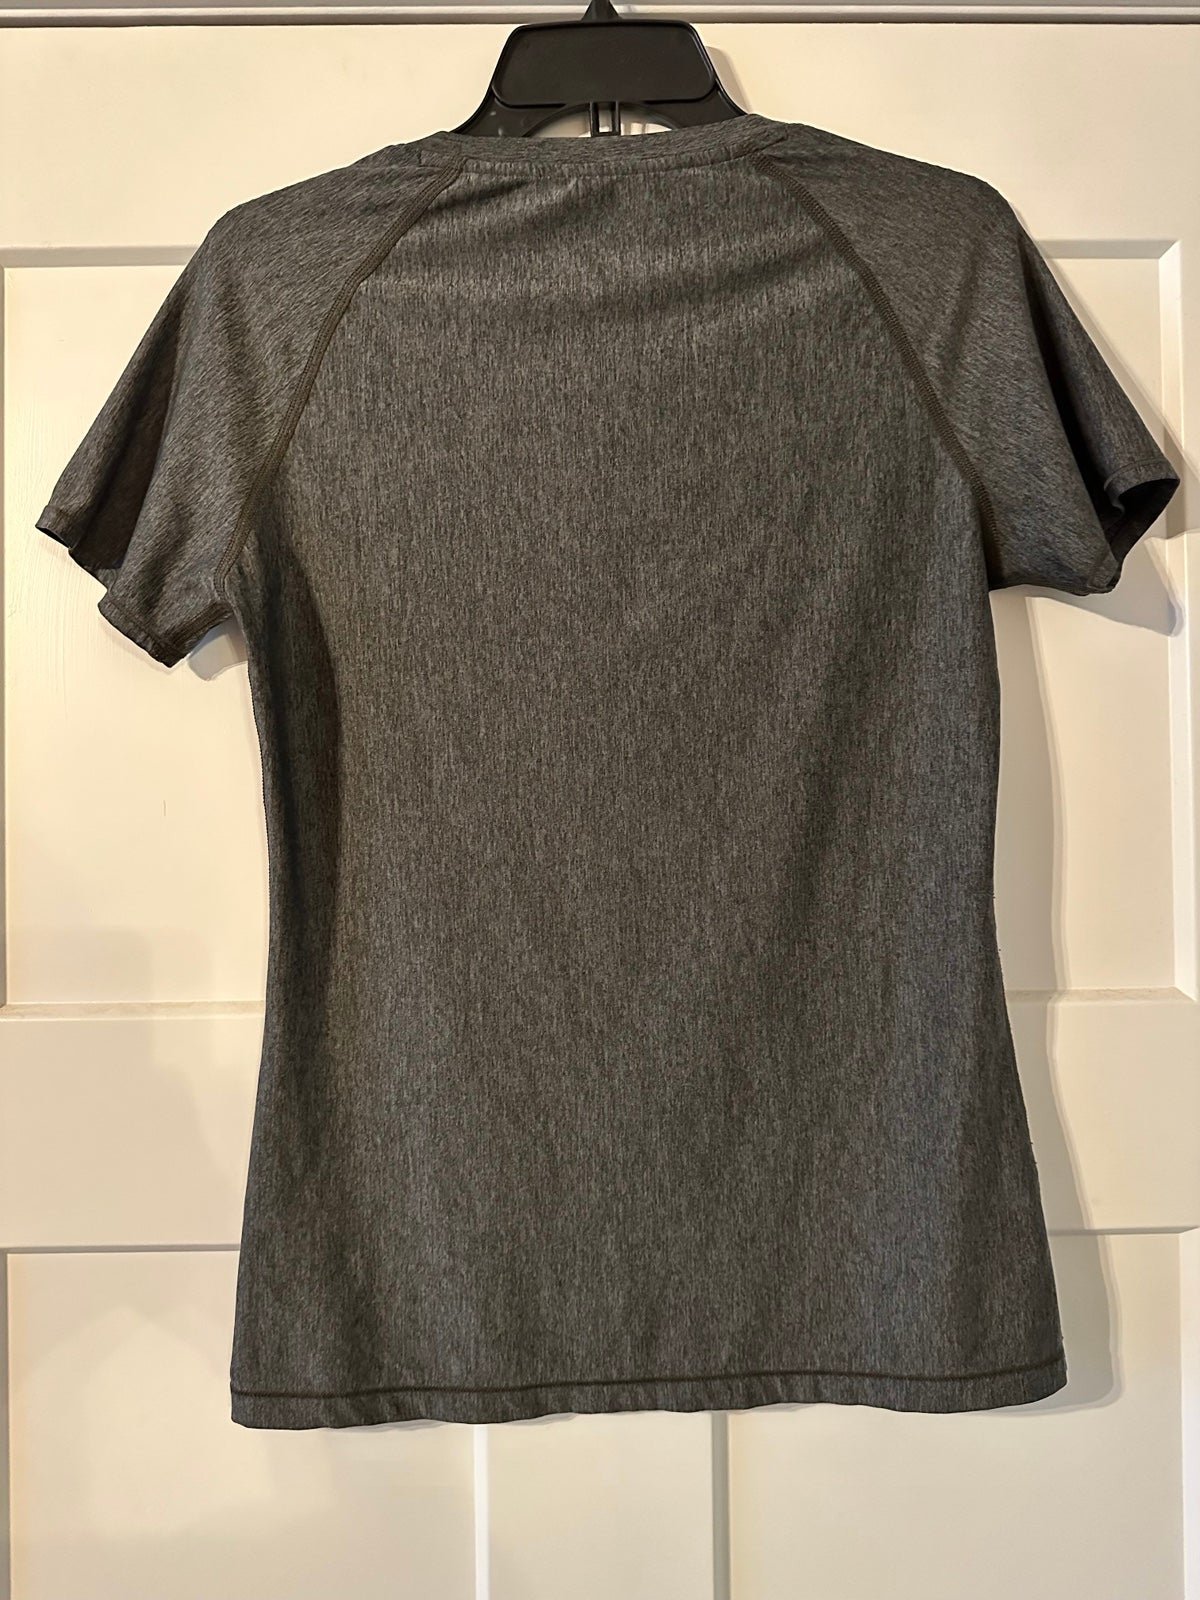 save up to 70% Under Armour Fitted Heat Gear Gray Short Sleeve Top Womens Sz S pFgv8sk5s New Style